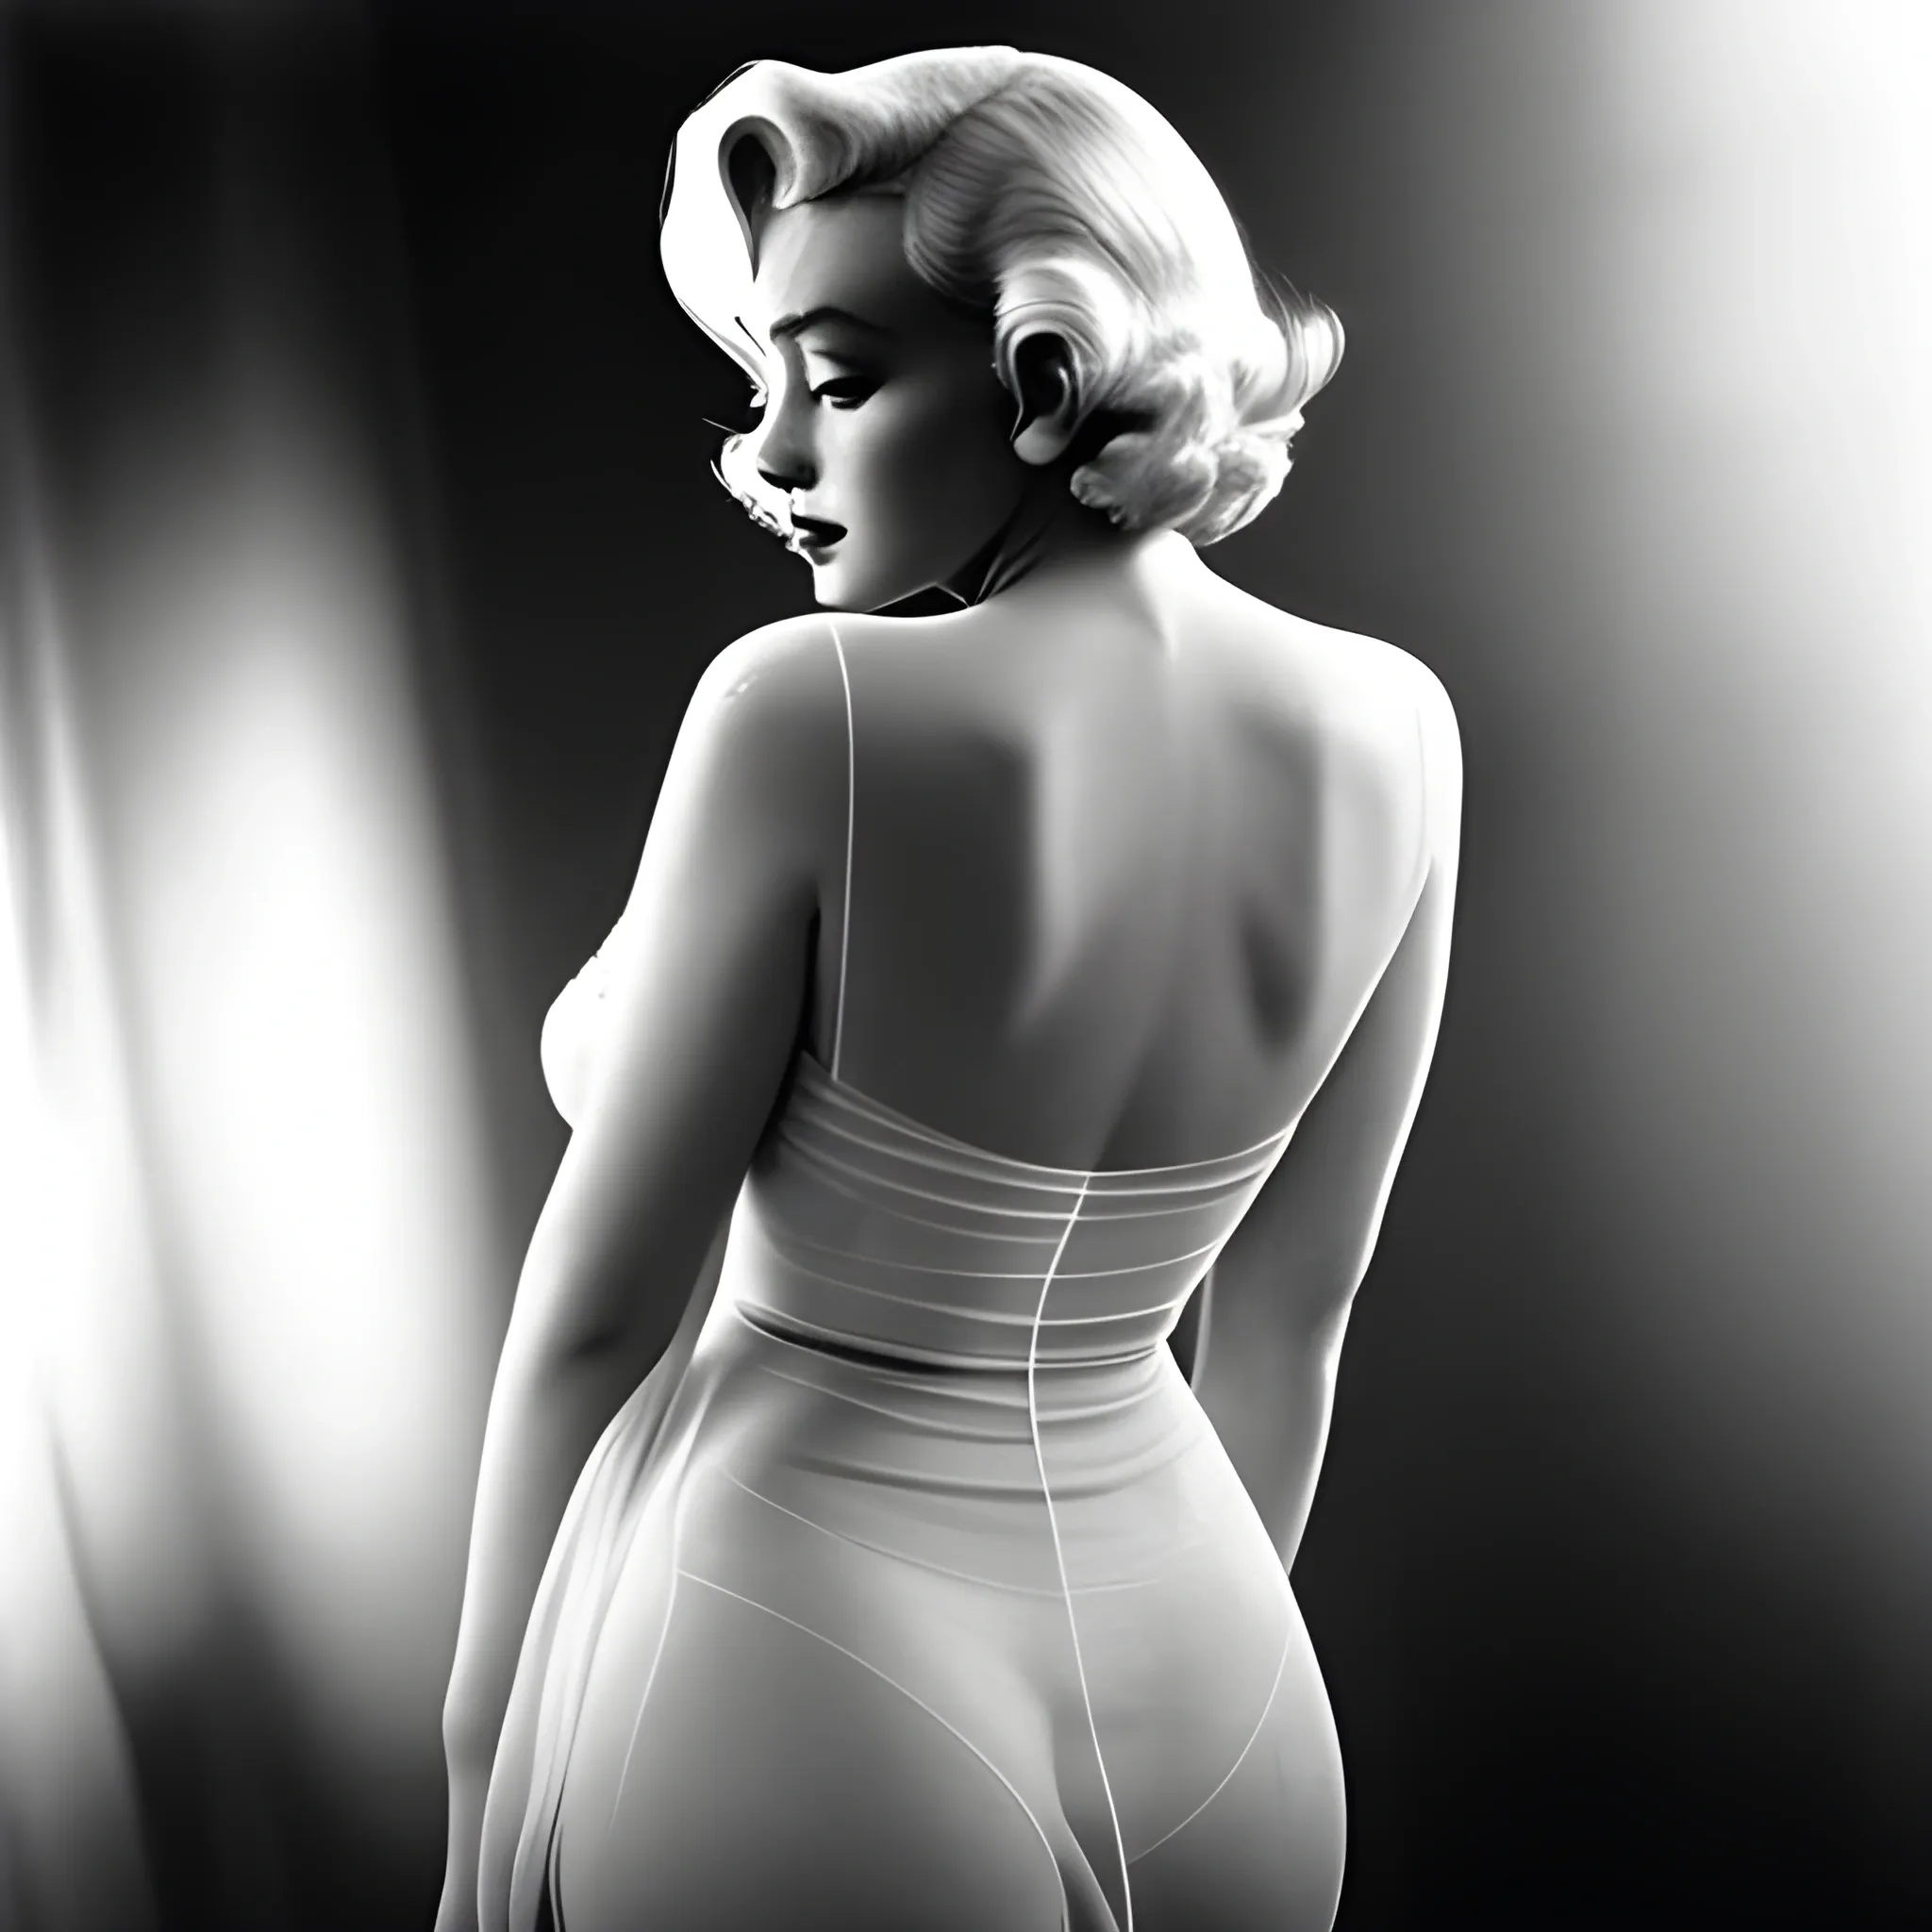  a realistic photography of Marilyn Monroe wearing see-through clothes. Shot with a 35mm lens, this captivating photograph captures Marilyn's alluring beauty in a delicate and sensual manner. The see-through fabric adds an element of mystery and intrigue to the image. Marilyn's expression is confident and seductive. The lighting is soft, casting a subtle glow on her figure. The atmosphere is charged with sensuality and elegance , back view